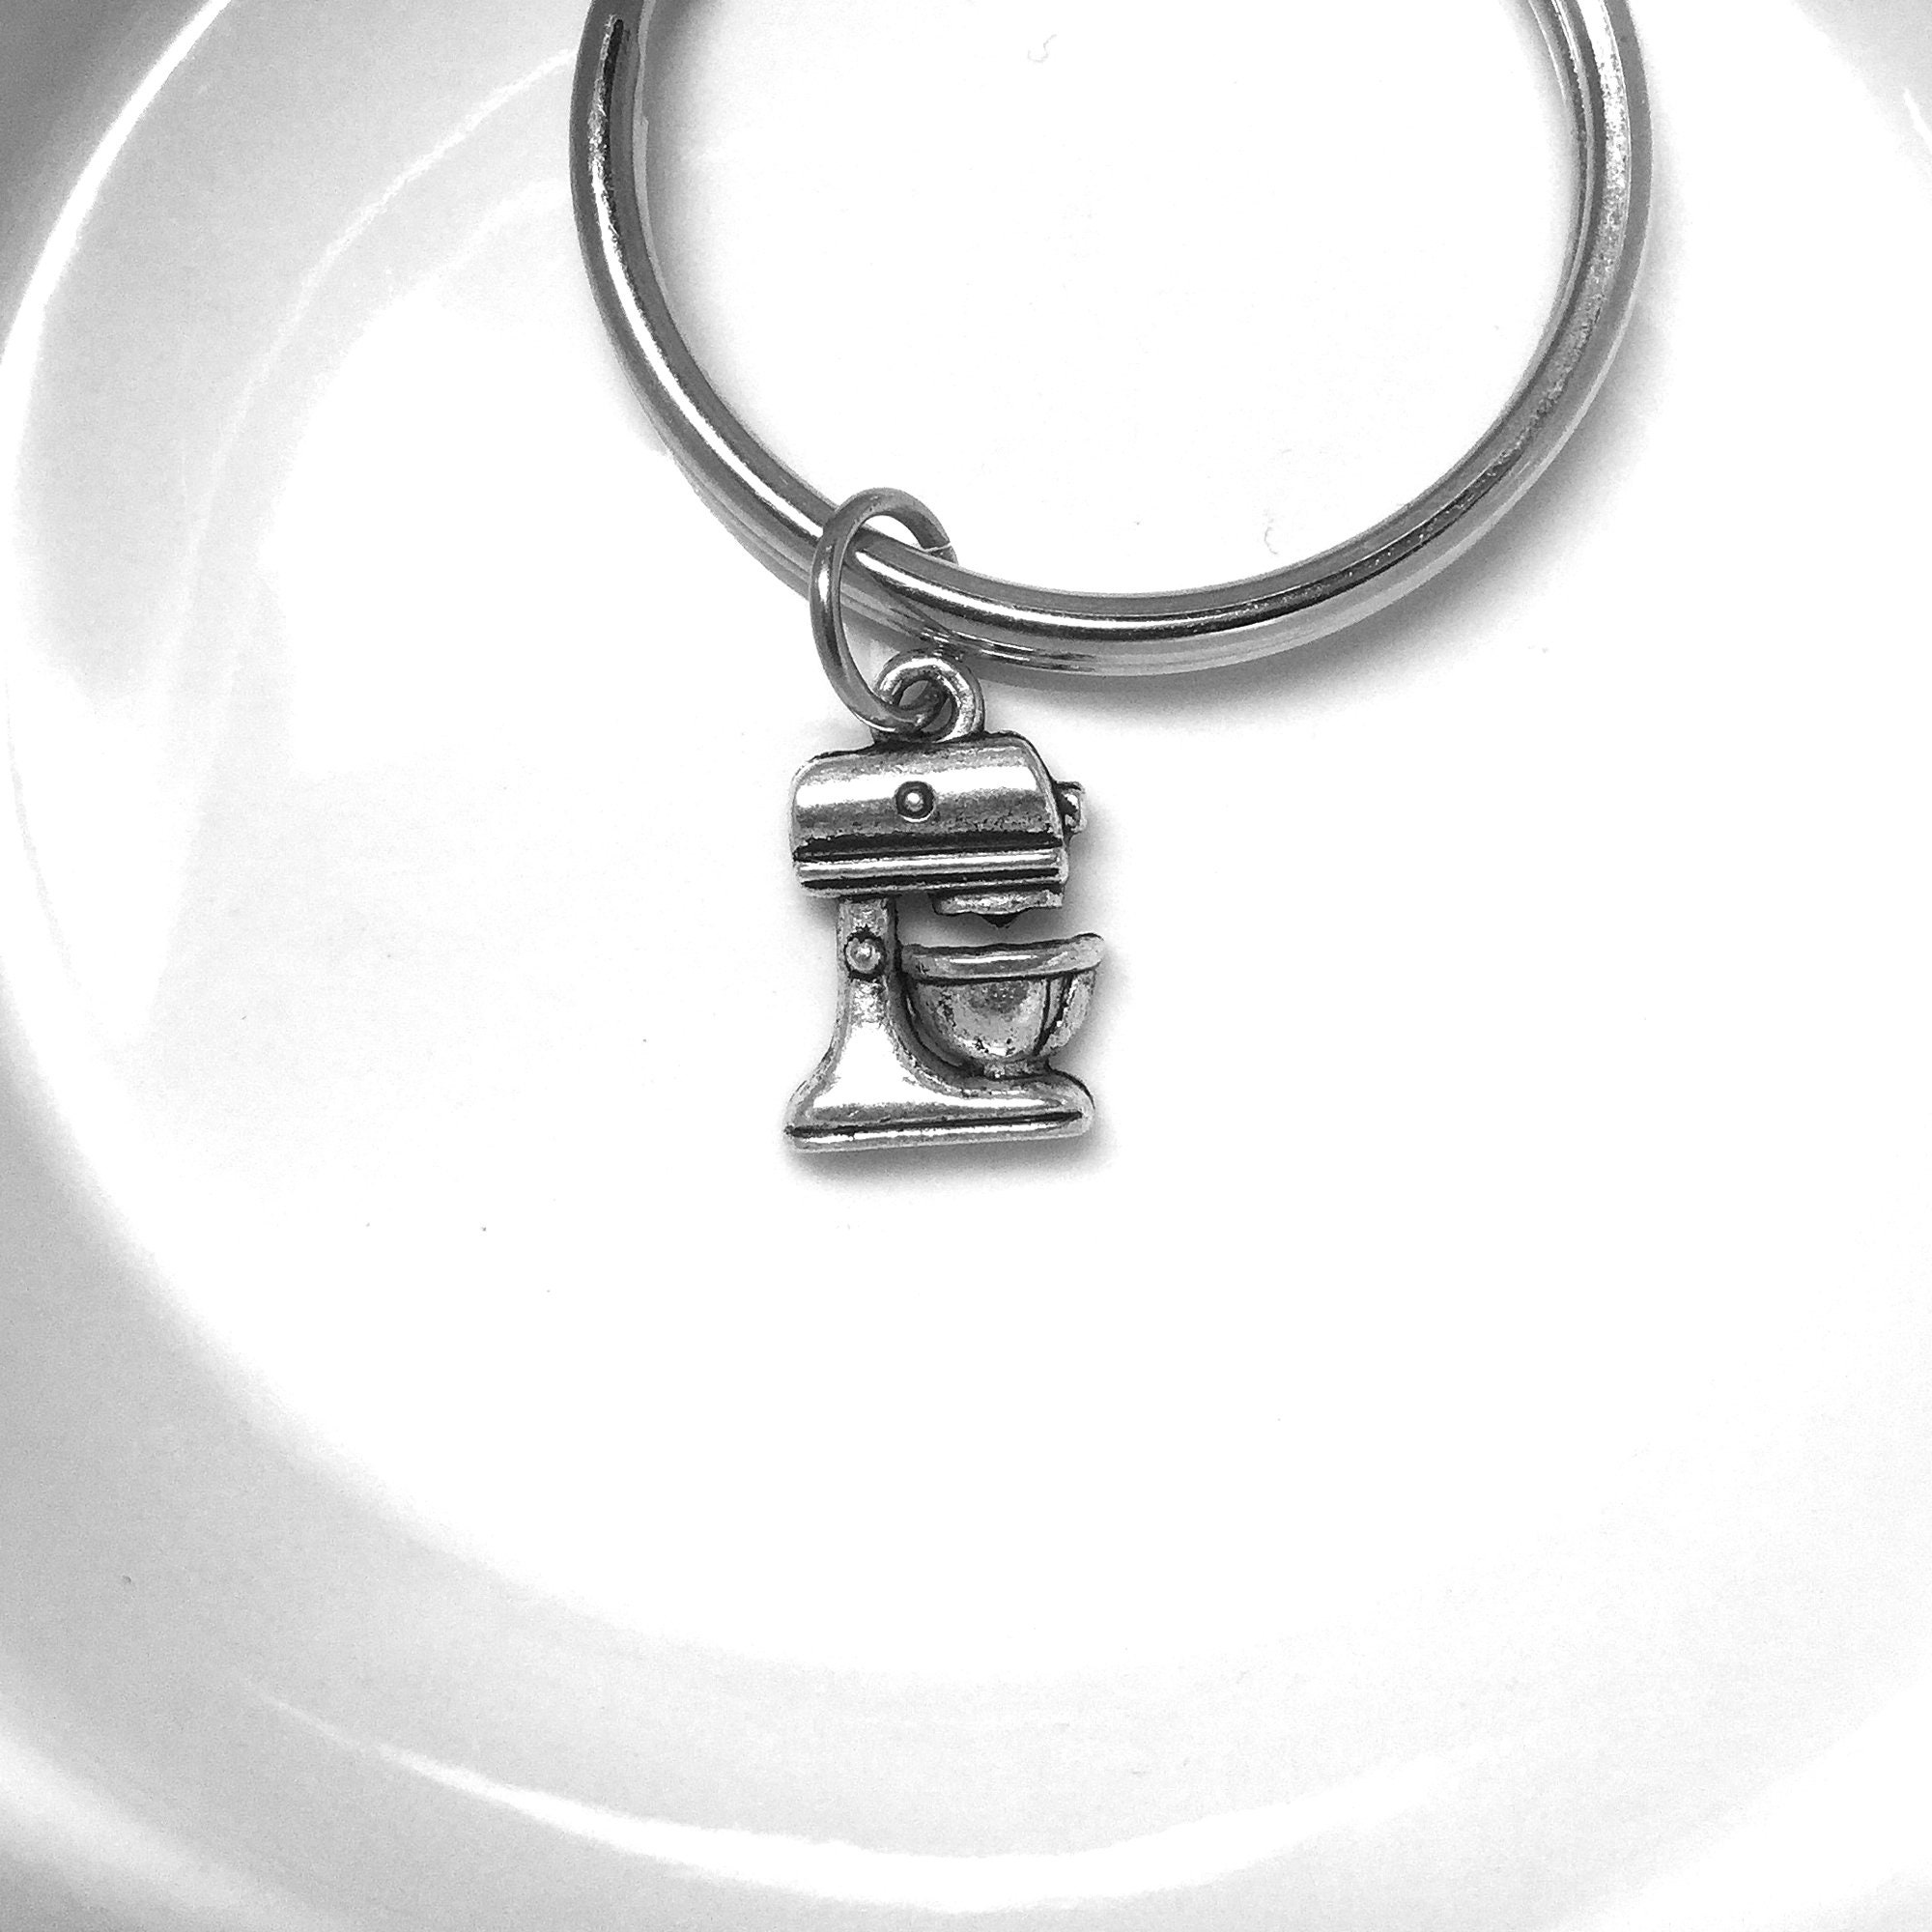 Pastry Chef Mixer Key Chain Charm in Sterling Silver